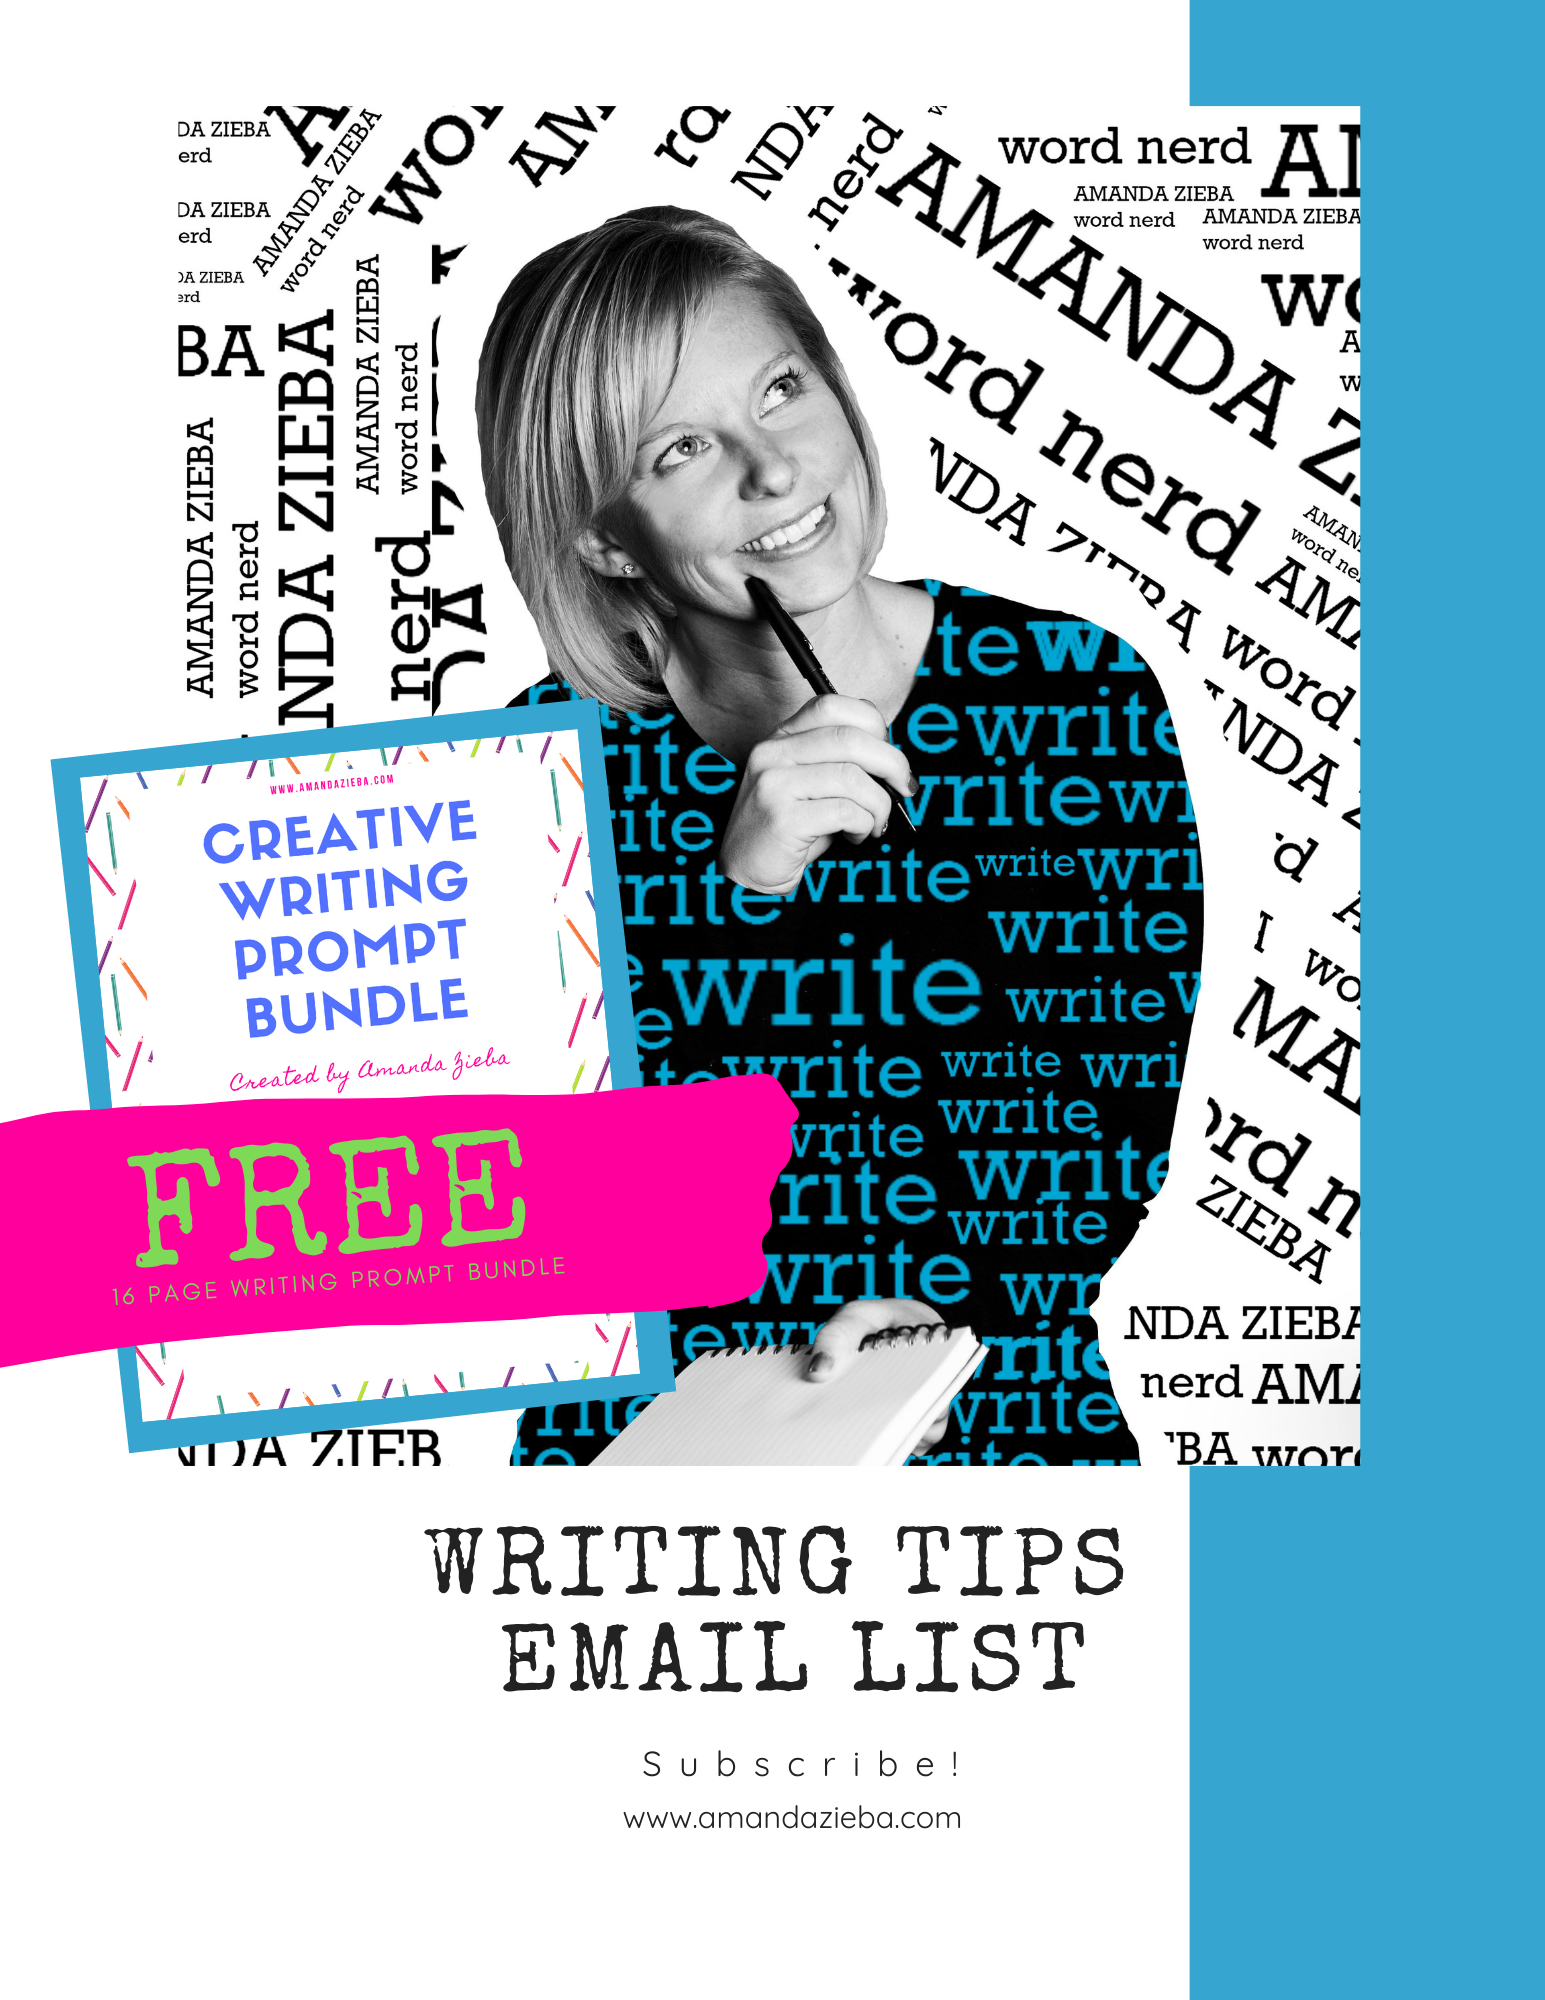 Writers Email List Landing Page_1.png